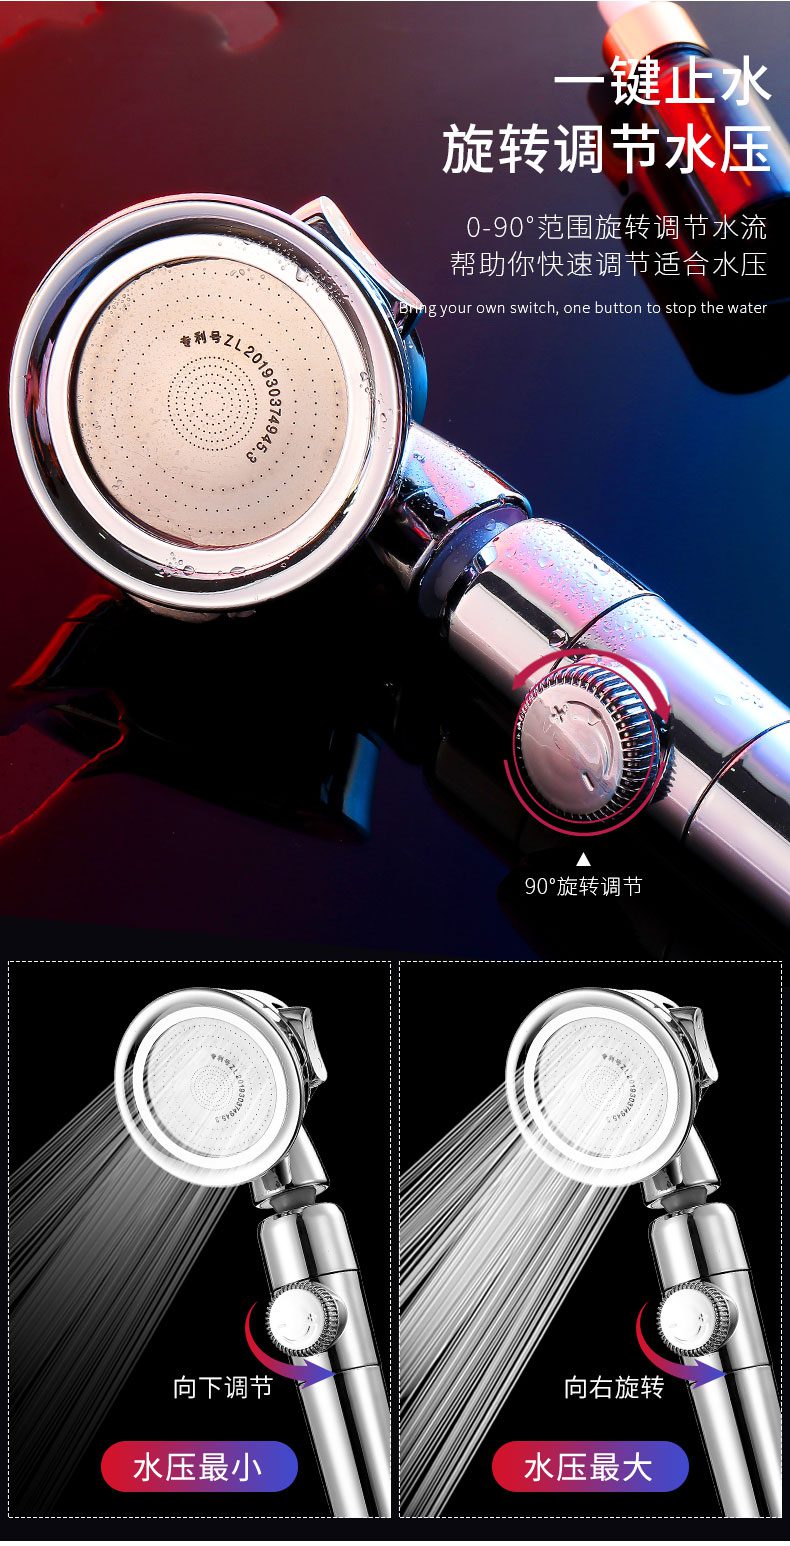 NEW High Quality High Pressure Shower Head with switch on/off button Bathroom 3-Function SPA Filter Bath Head Water Saving Showe